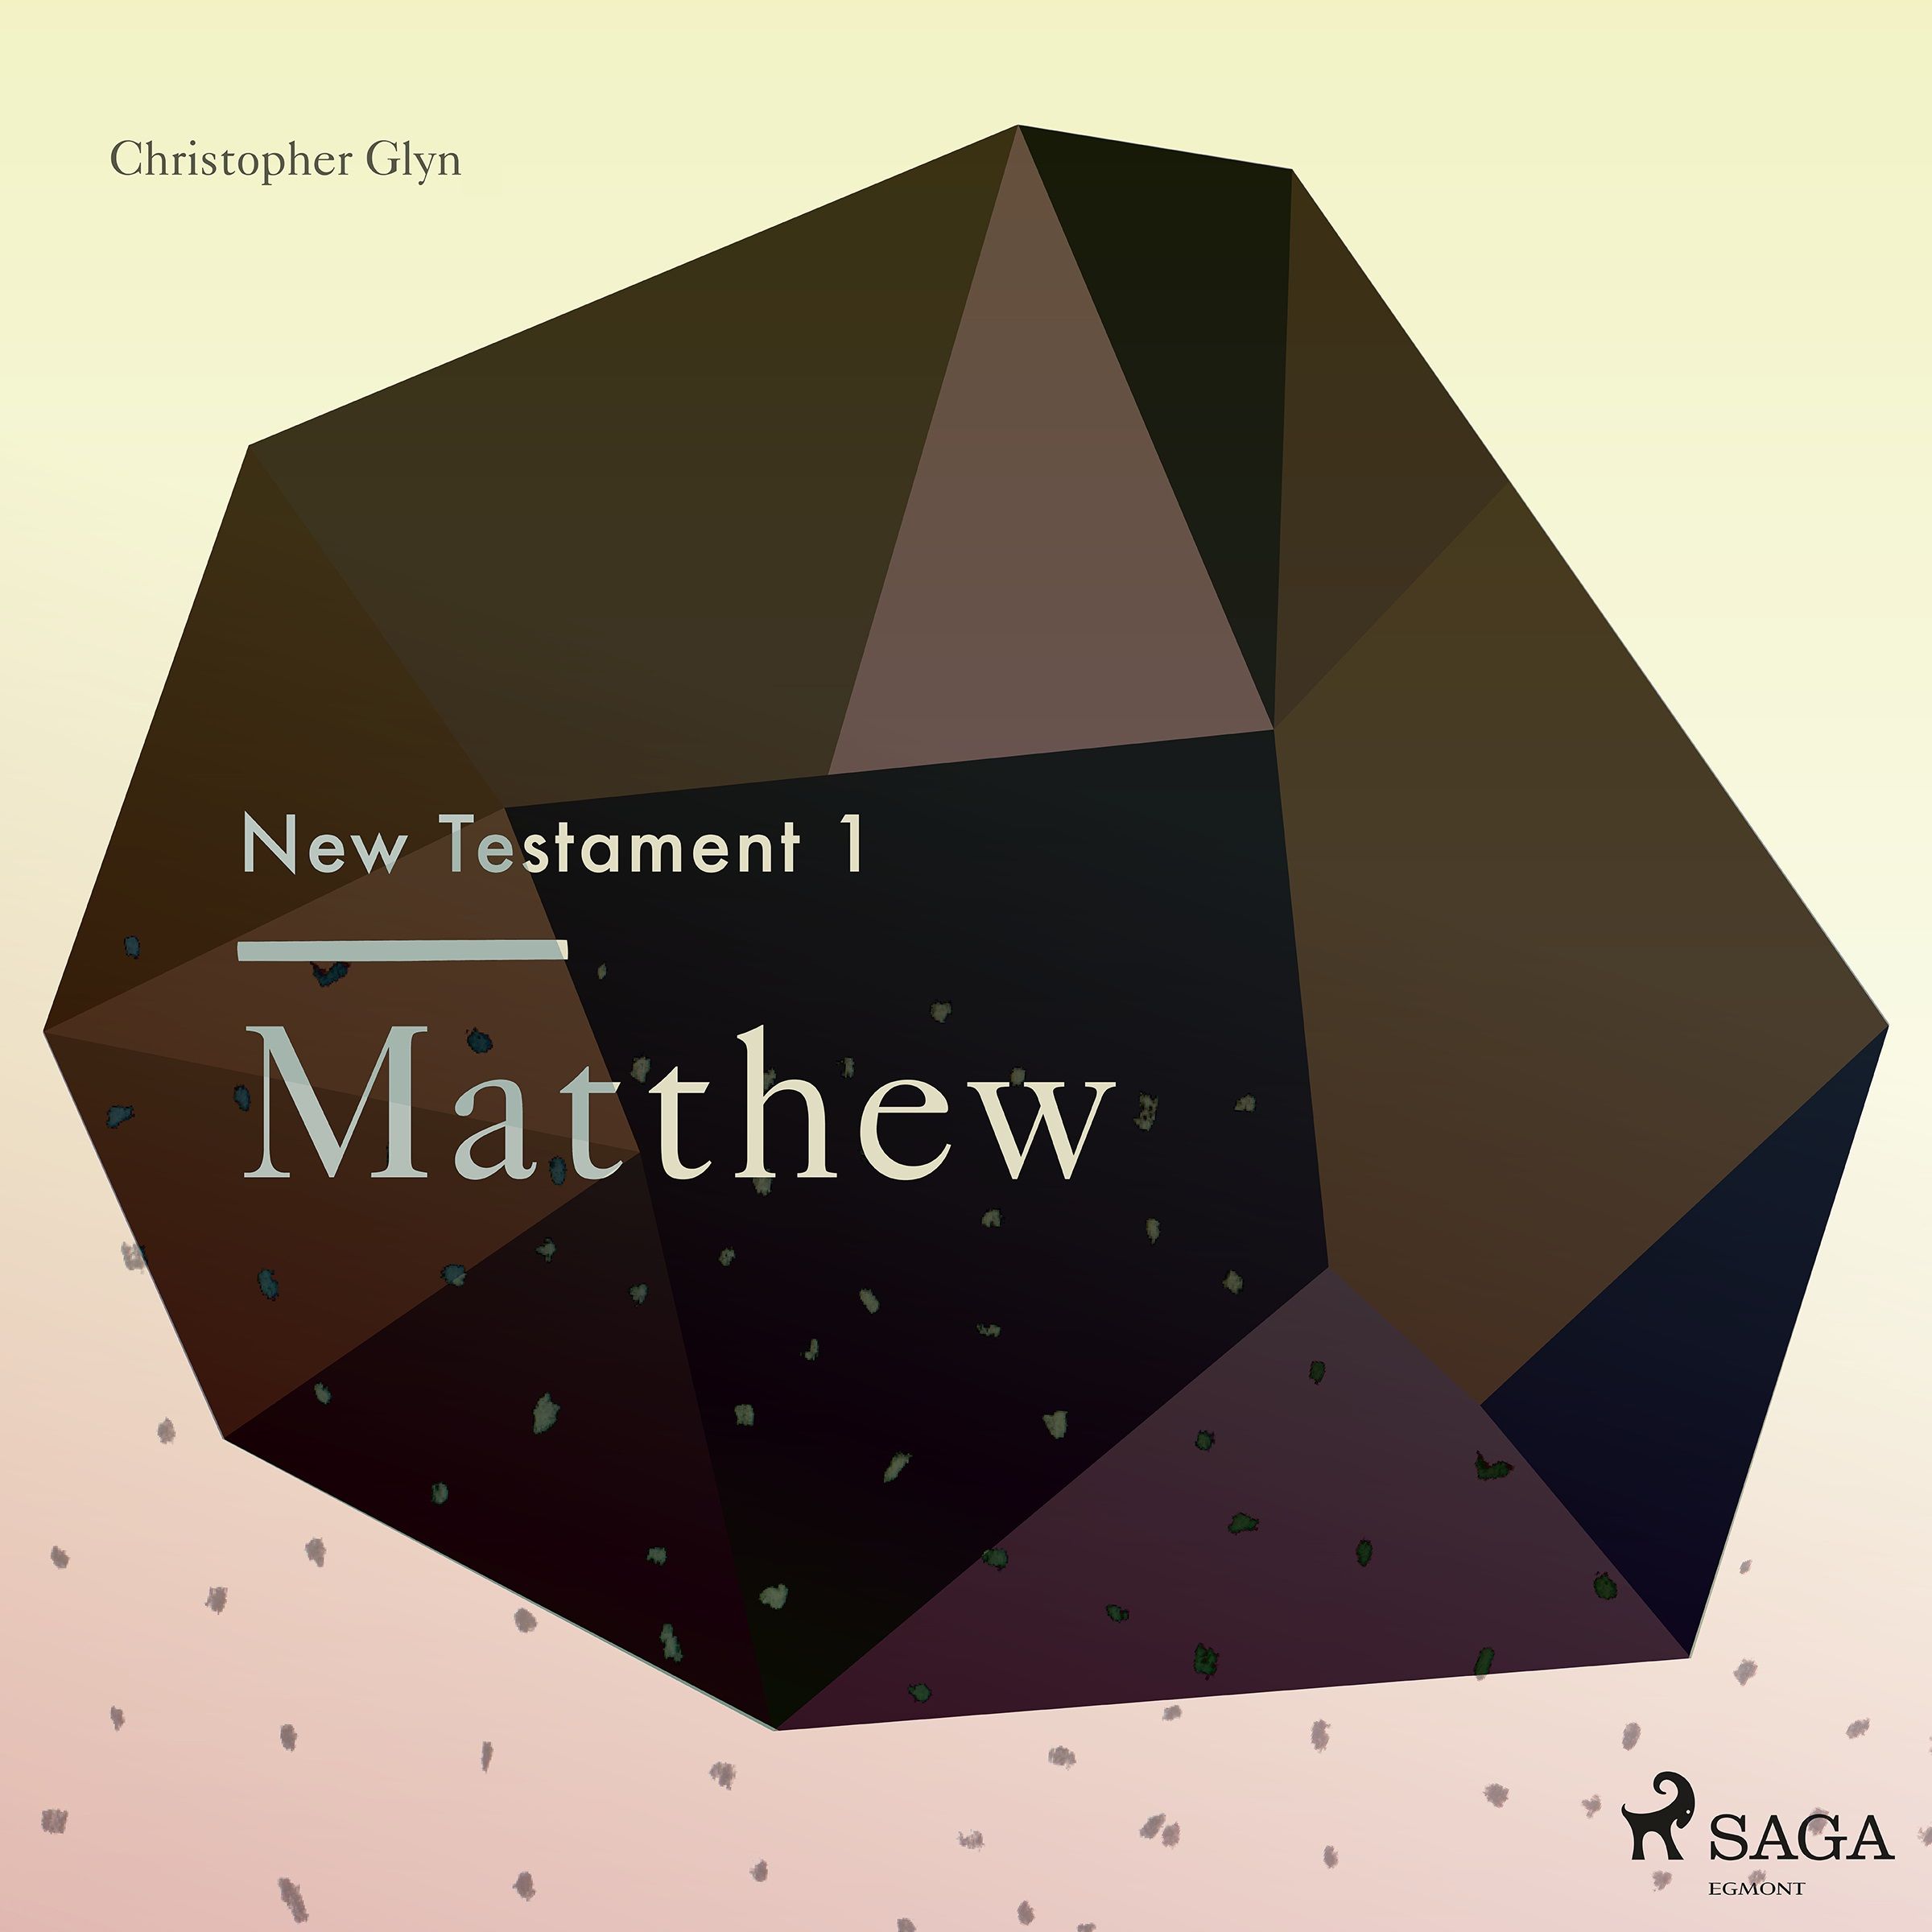 The New Testament 1 - Matthew, audiobook by Christopher Glyn